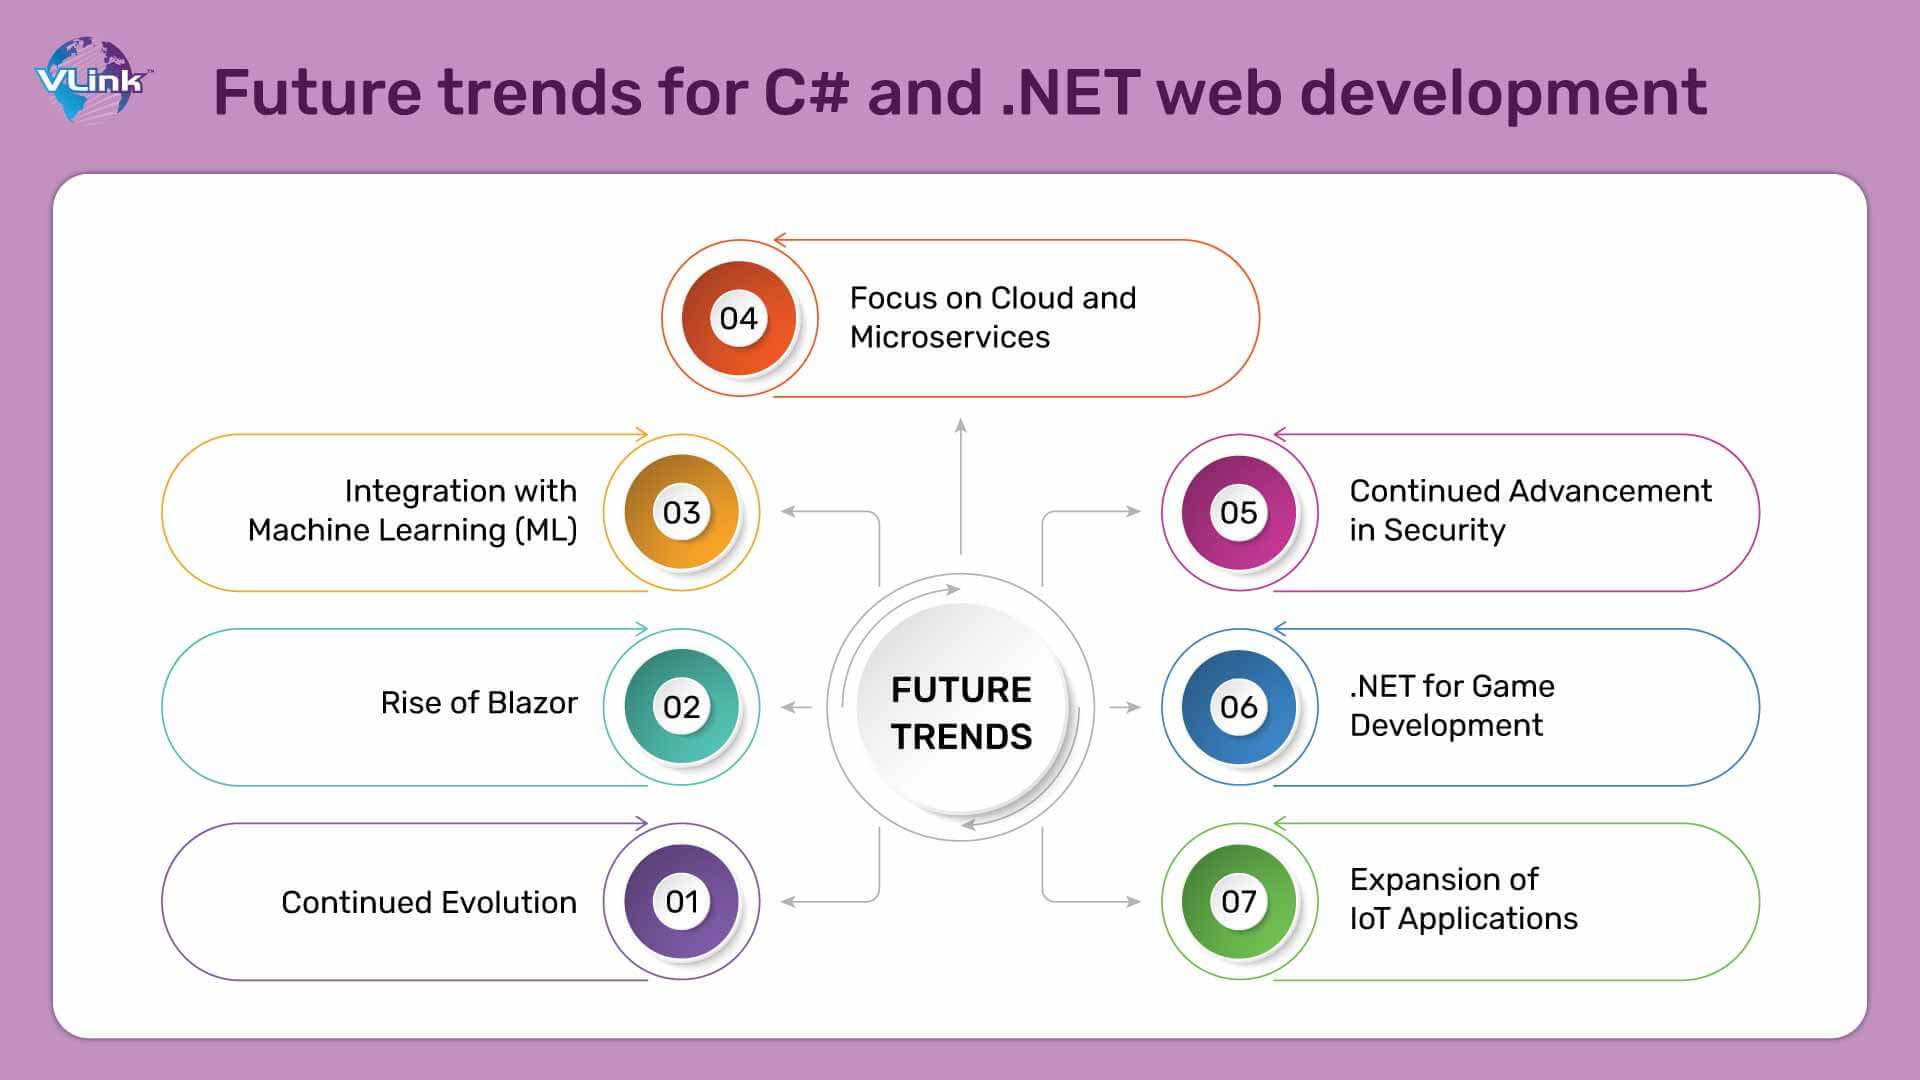 Future trends for C# and .NET web development